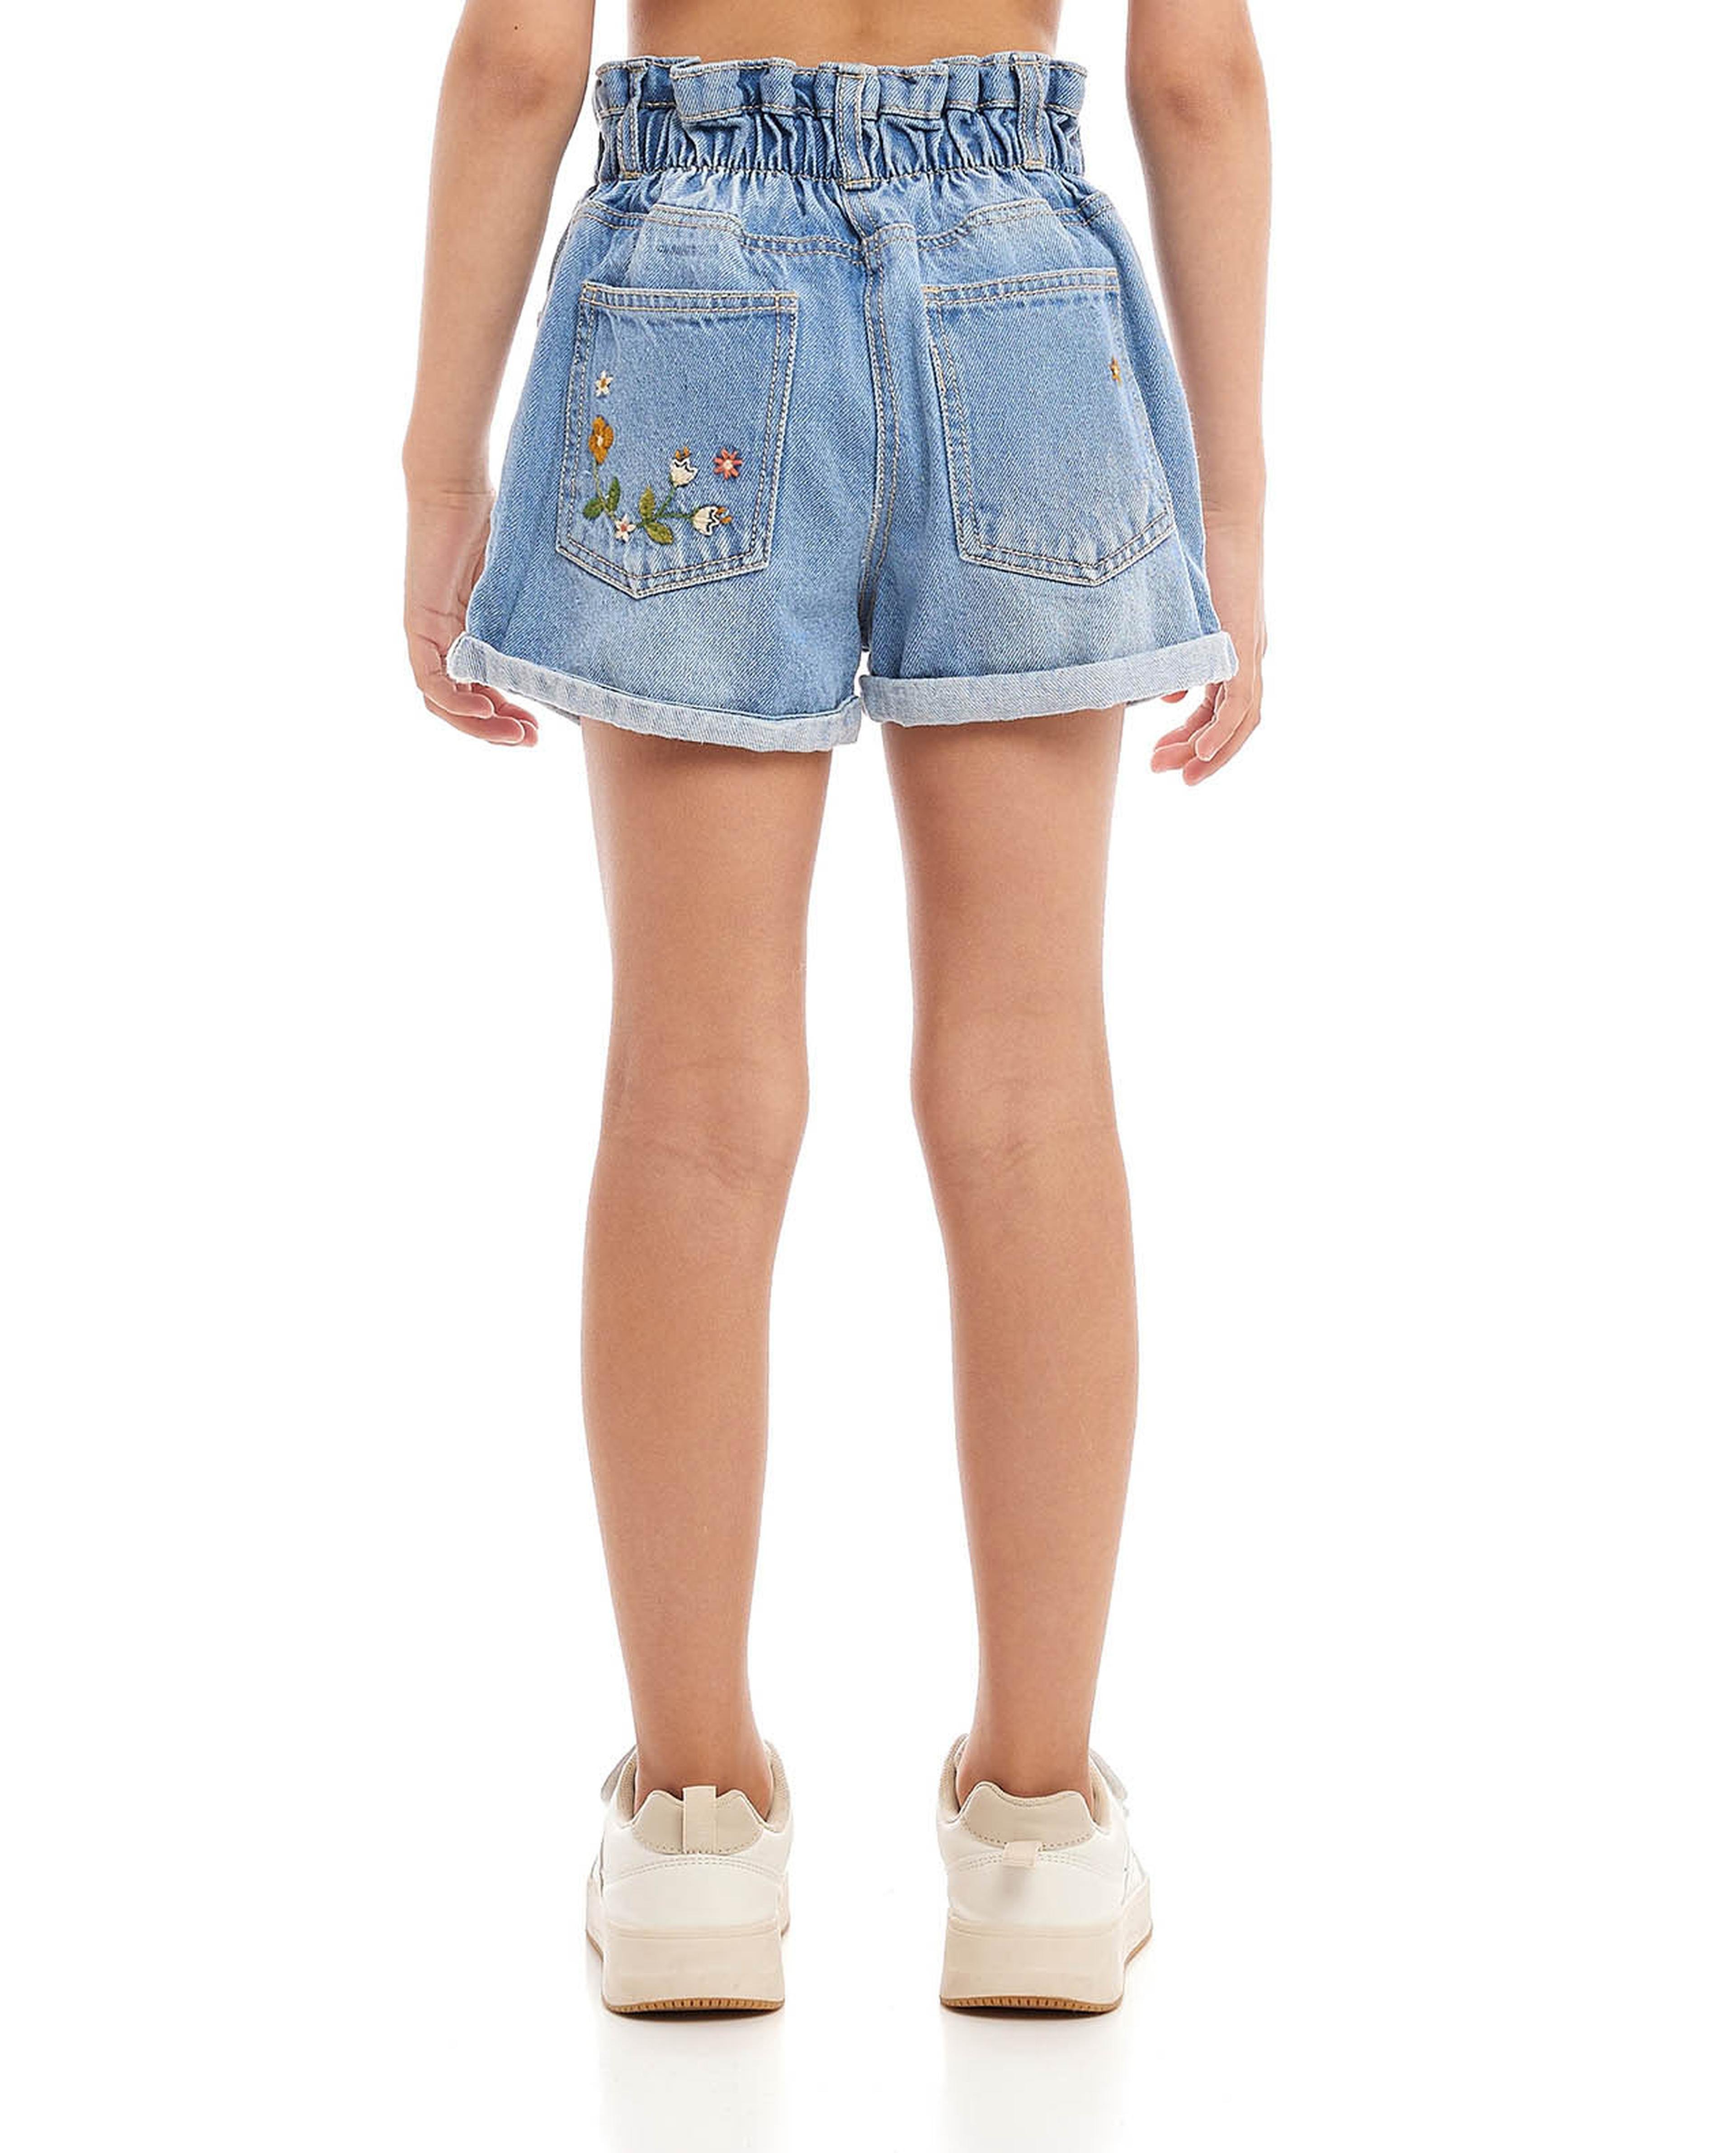 Embroidered Shorts with Button Closure